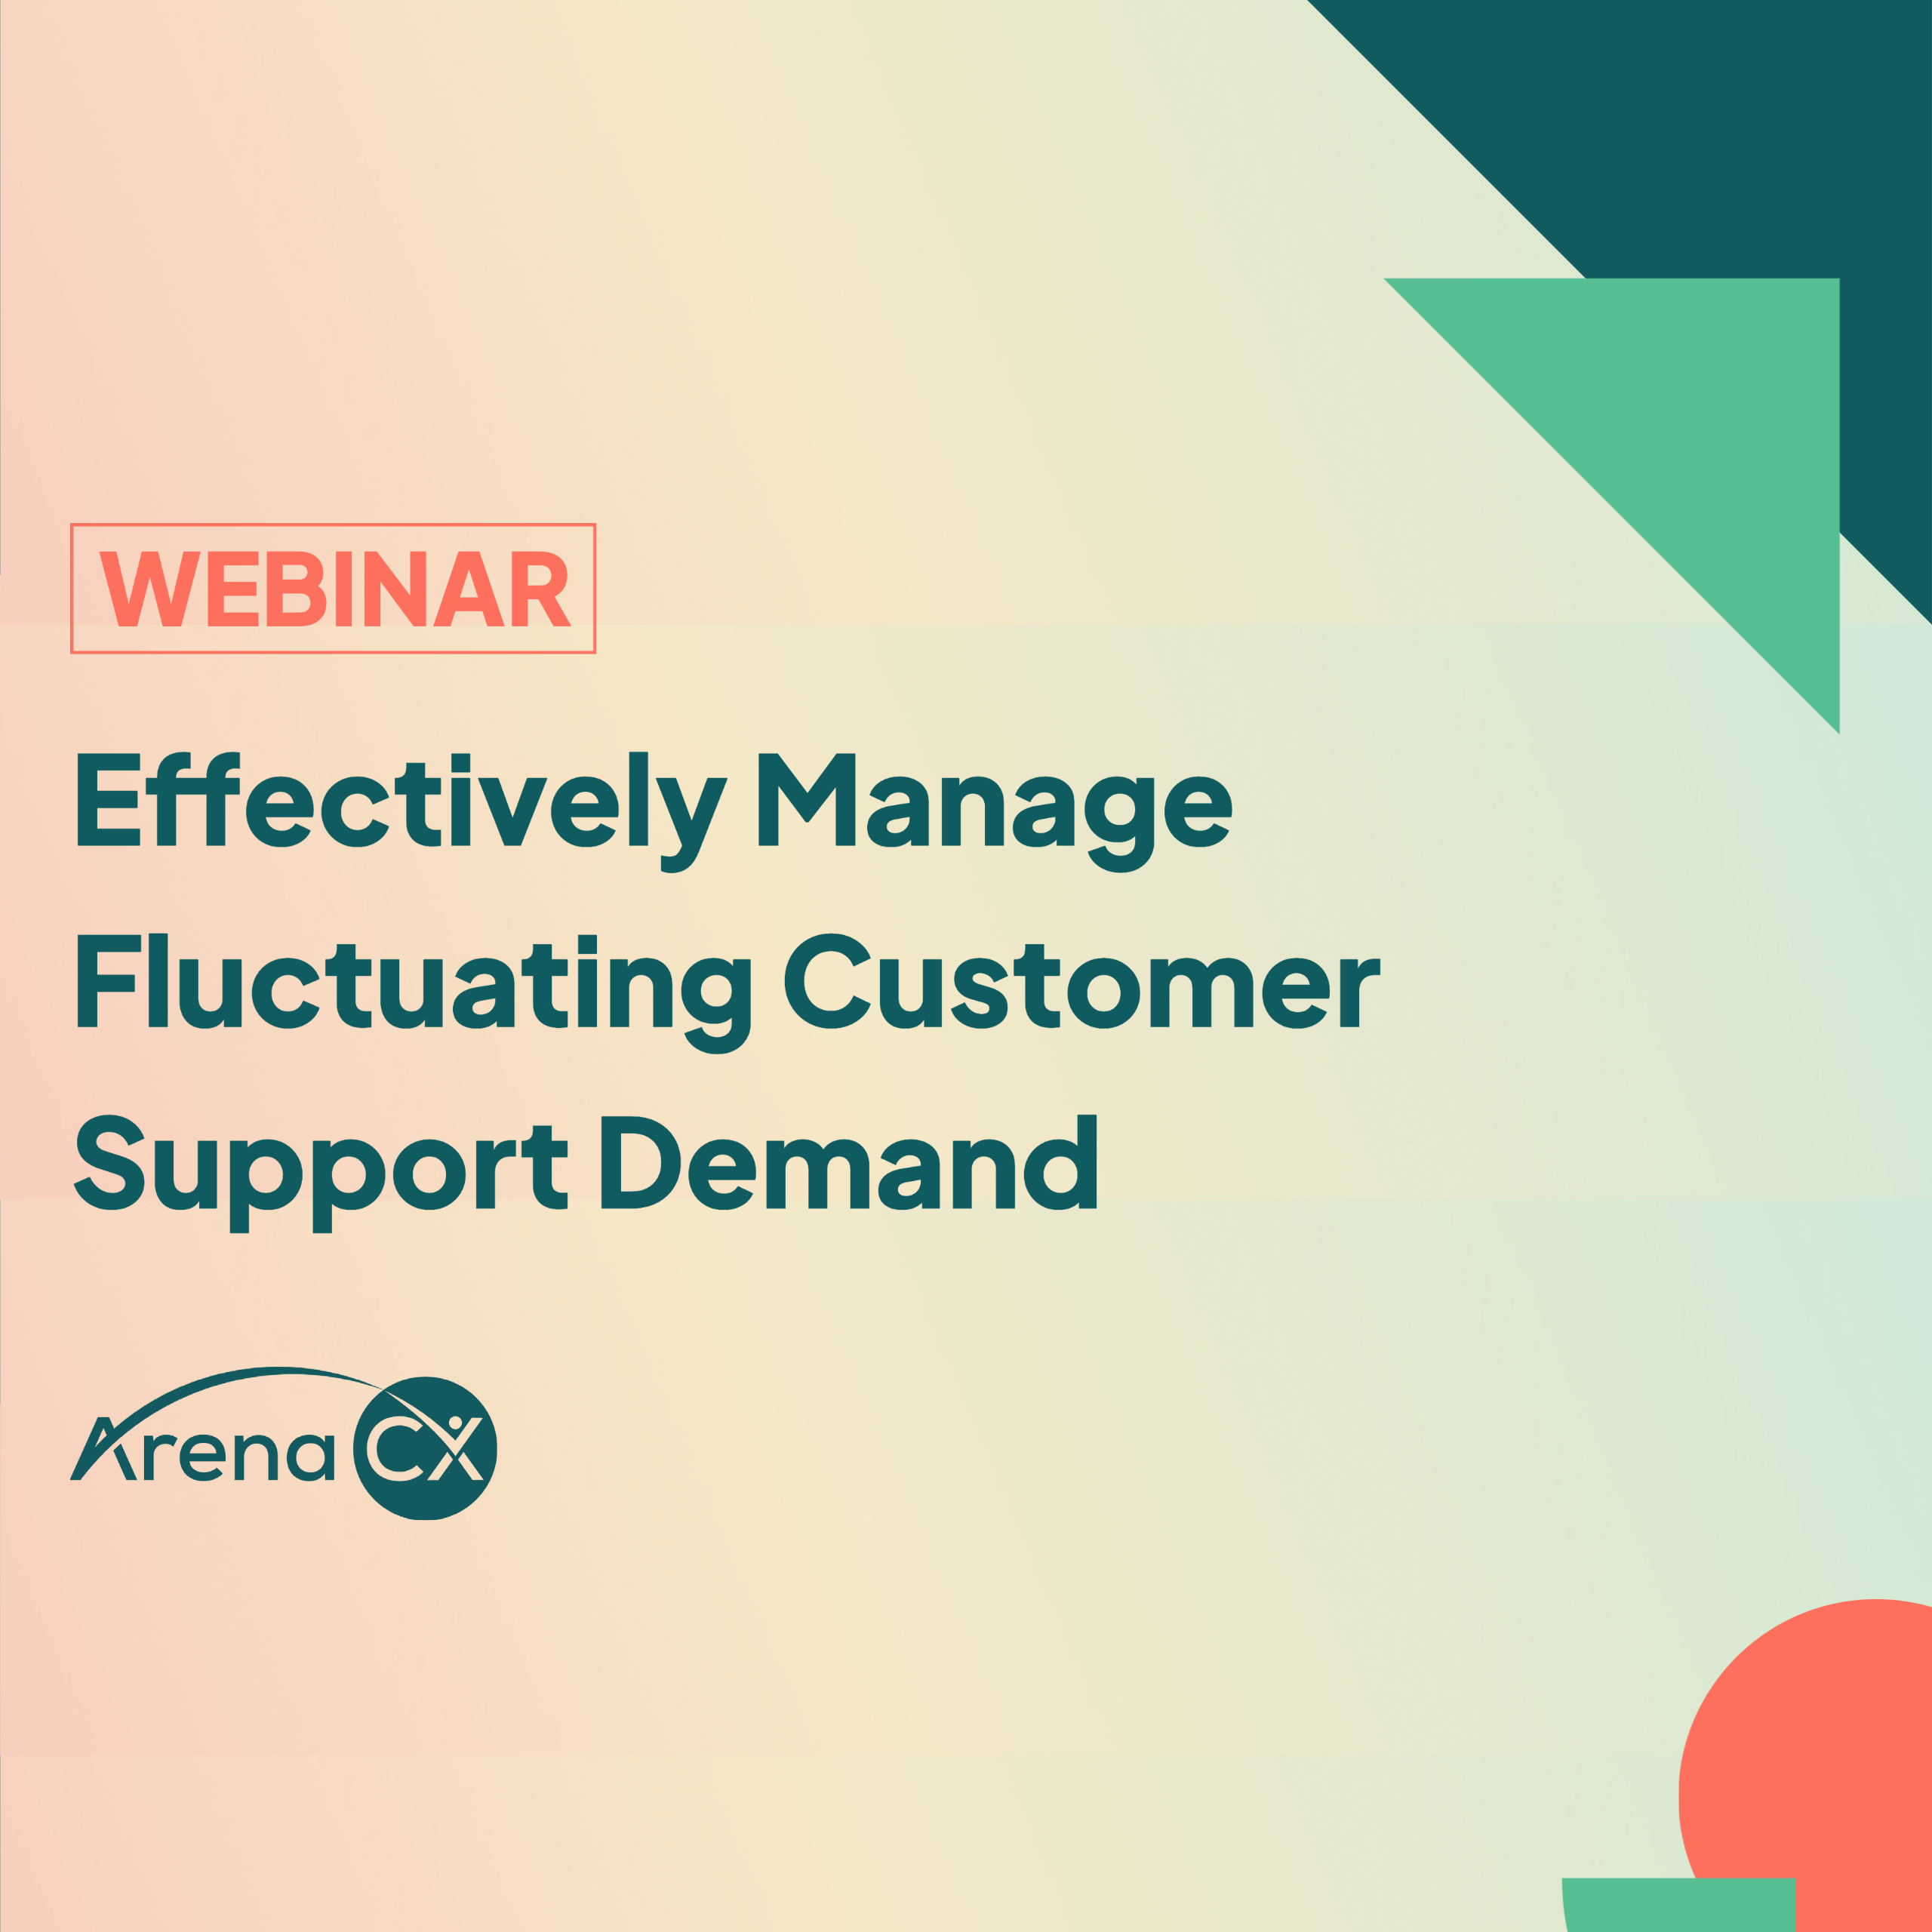 Managing Fluctuating Customer Support Demand